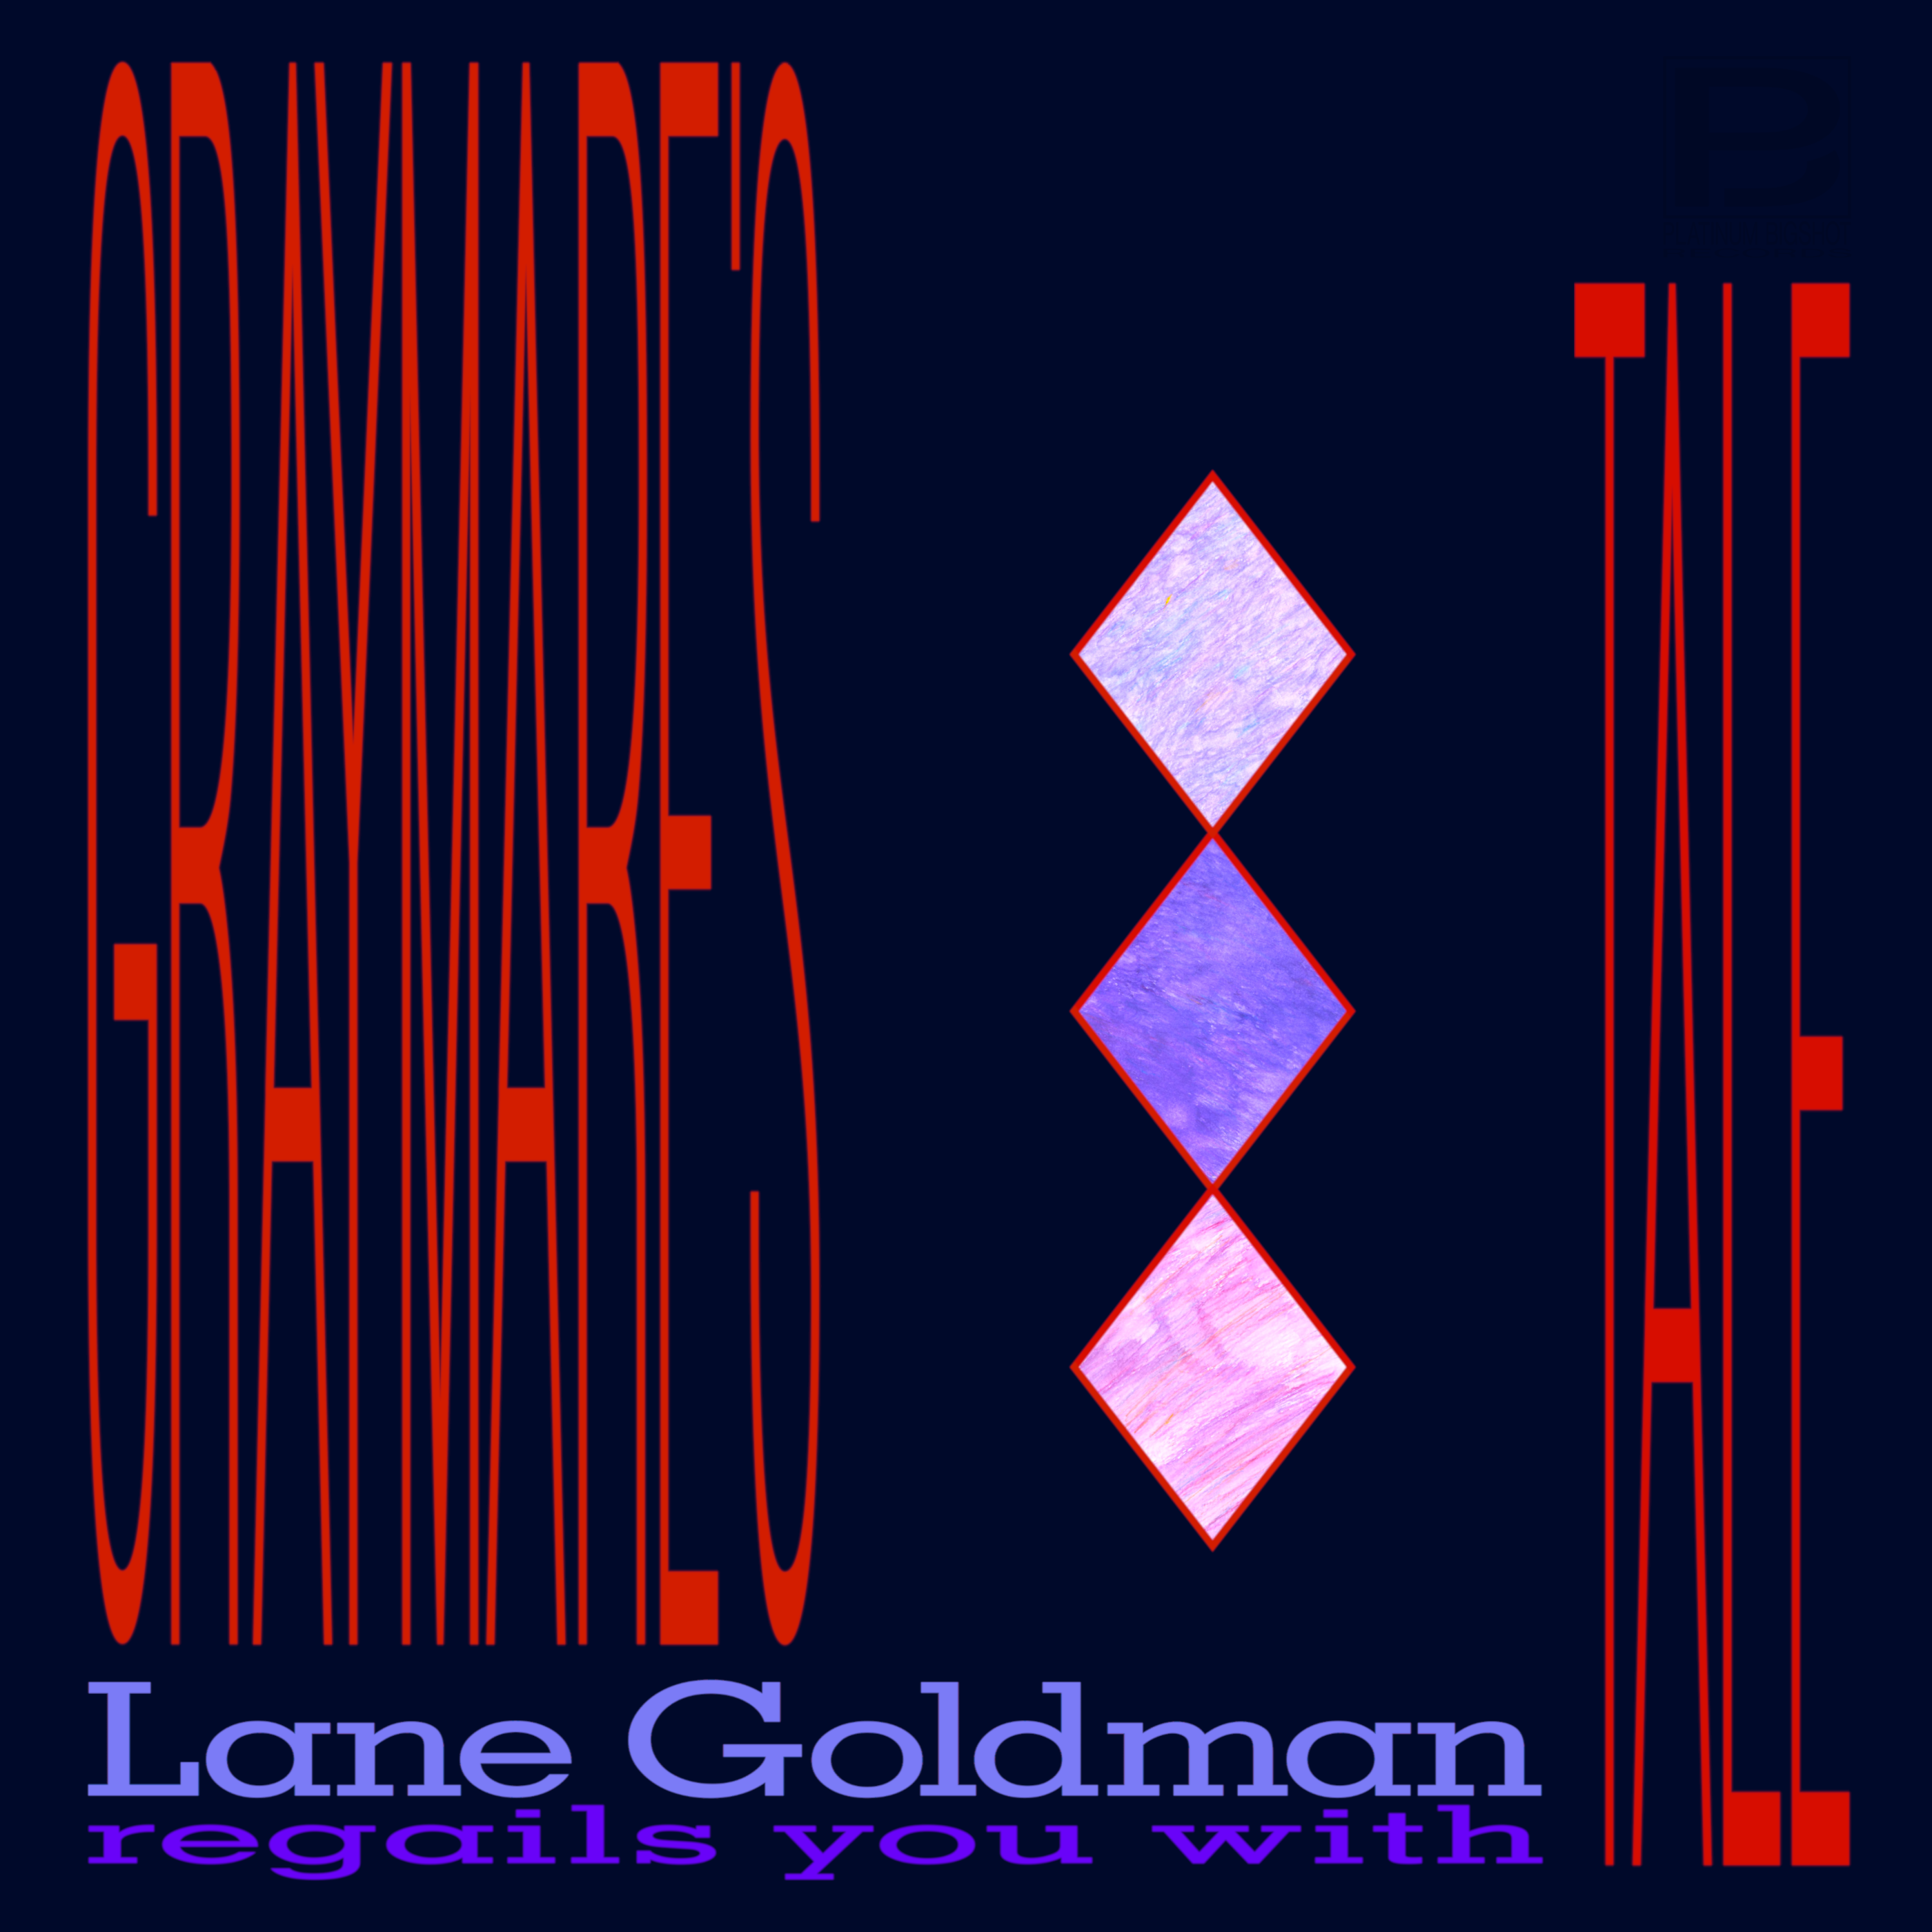 Graymare's tale cover art. A dark blue background. The words Lane Goldman reagails you with Graymare's tale in periwinkle, violet and tangerine take up the most space, stretched and squashed into reflecting pool oblivion. In three diamond-shaped cutouts are hints of opalescent texture-scapes in various shades of pink and purple.